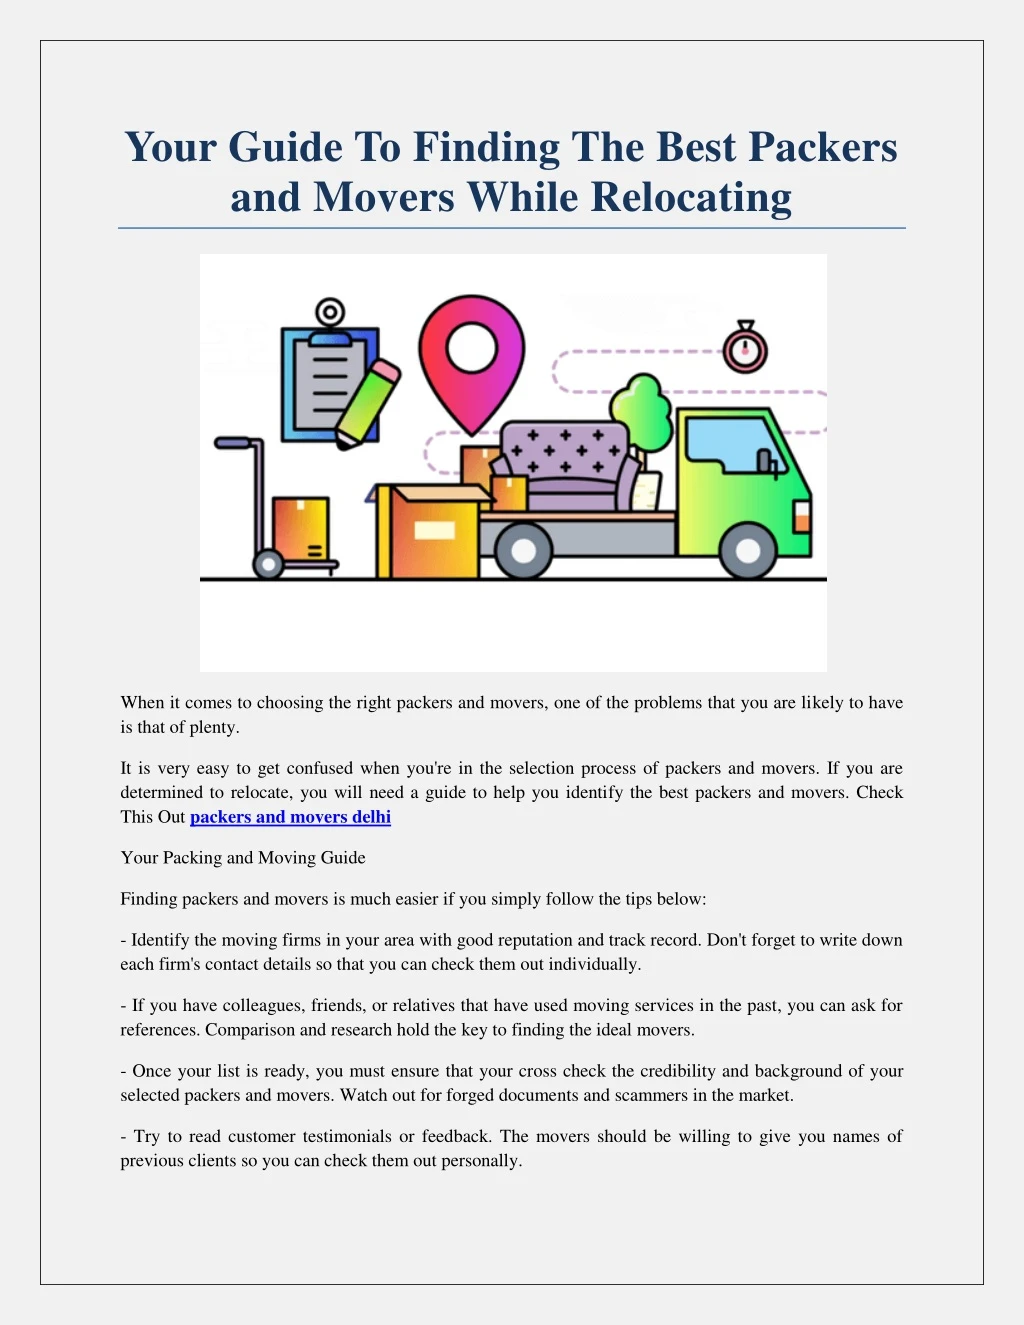 your guide to finding the best packers and movers